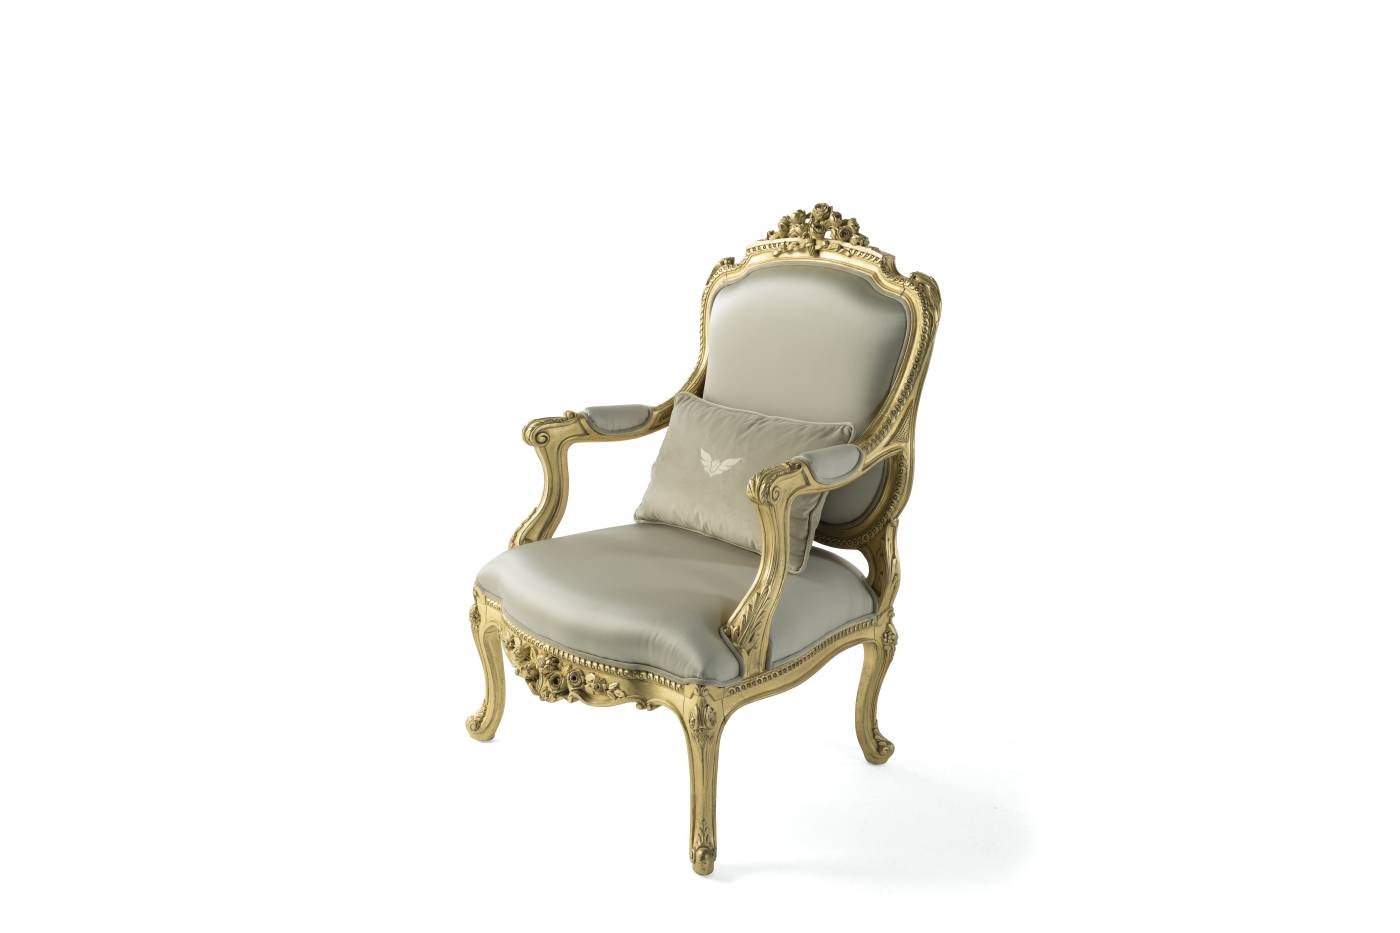 FLEURY armchair - Bespoke projects with luxury Made in Italy classic furniture